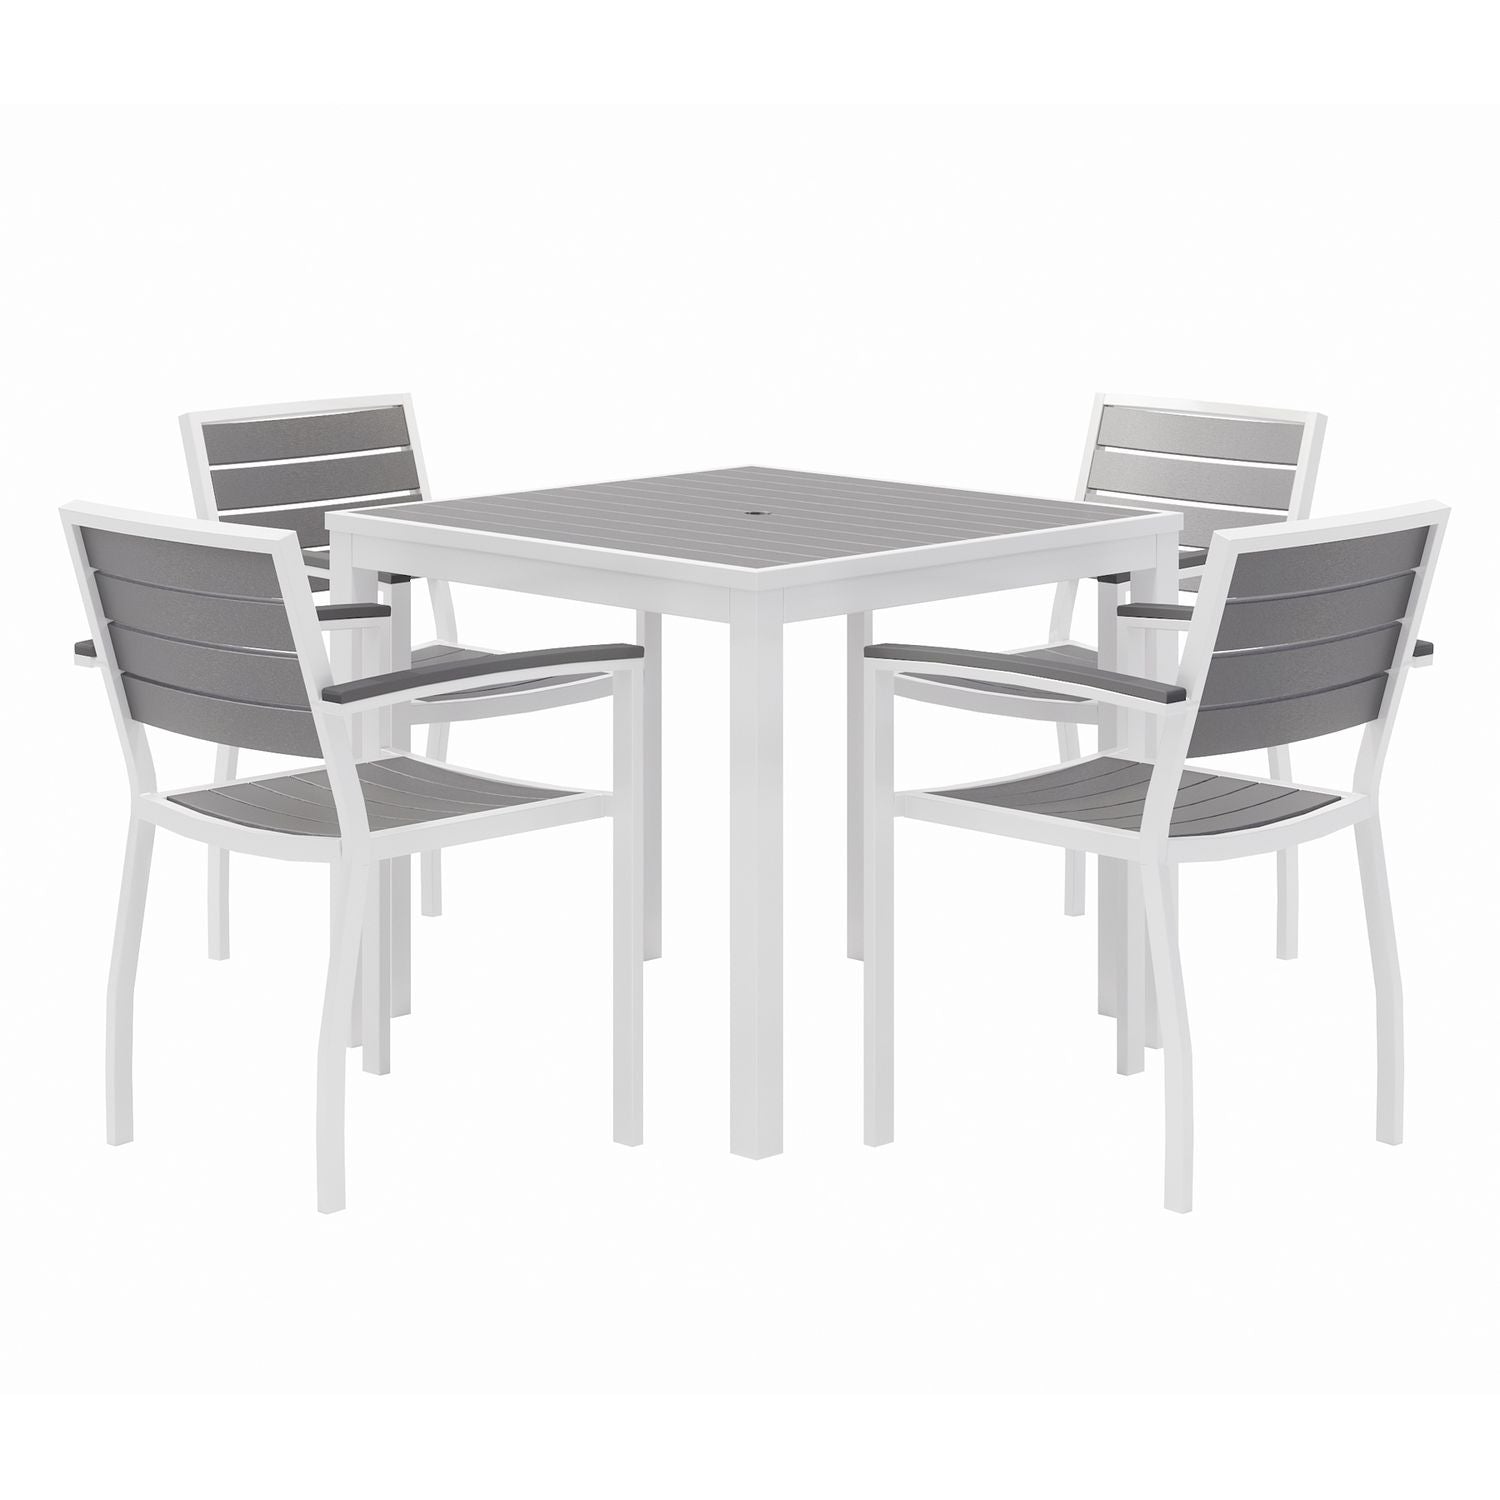 eveleen-outdoor-patio-table-with-four-gray-powder-coated-polymer-chairs-32-square-gray-ships-in-4-6-business-days_kfi840031918550 - 1